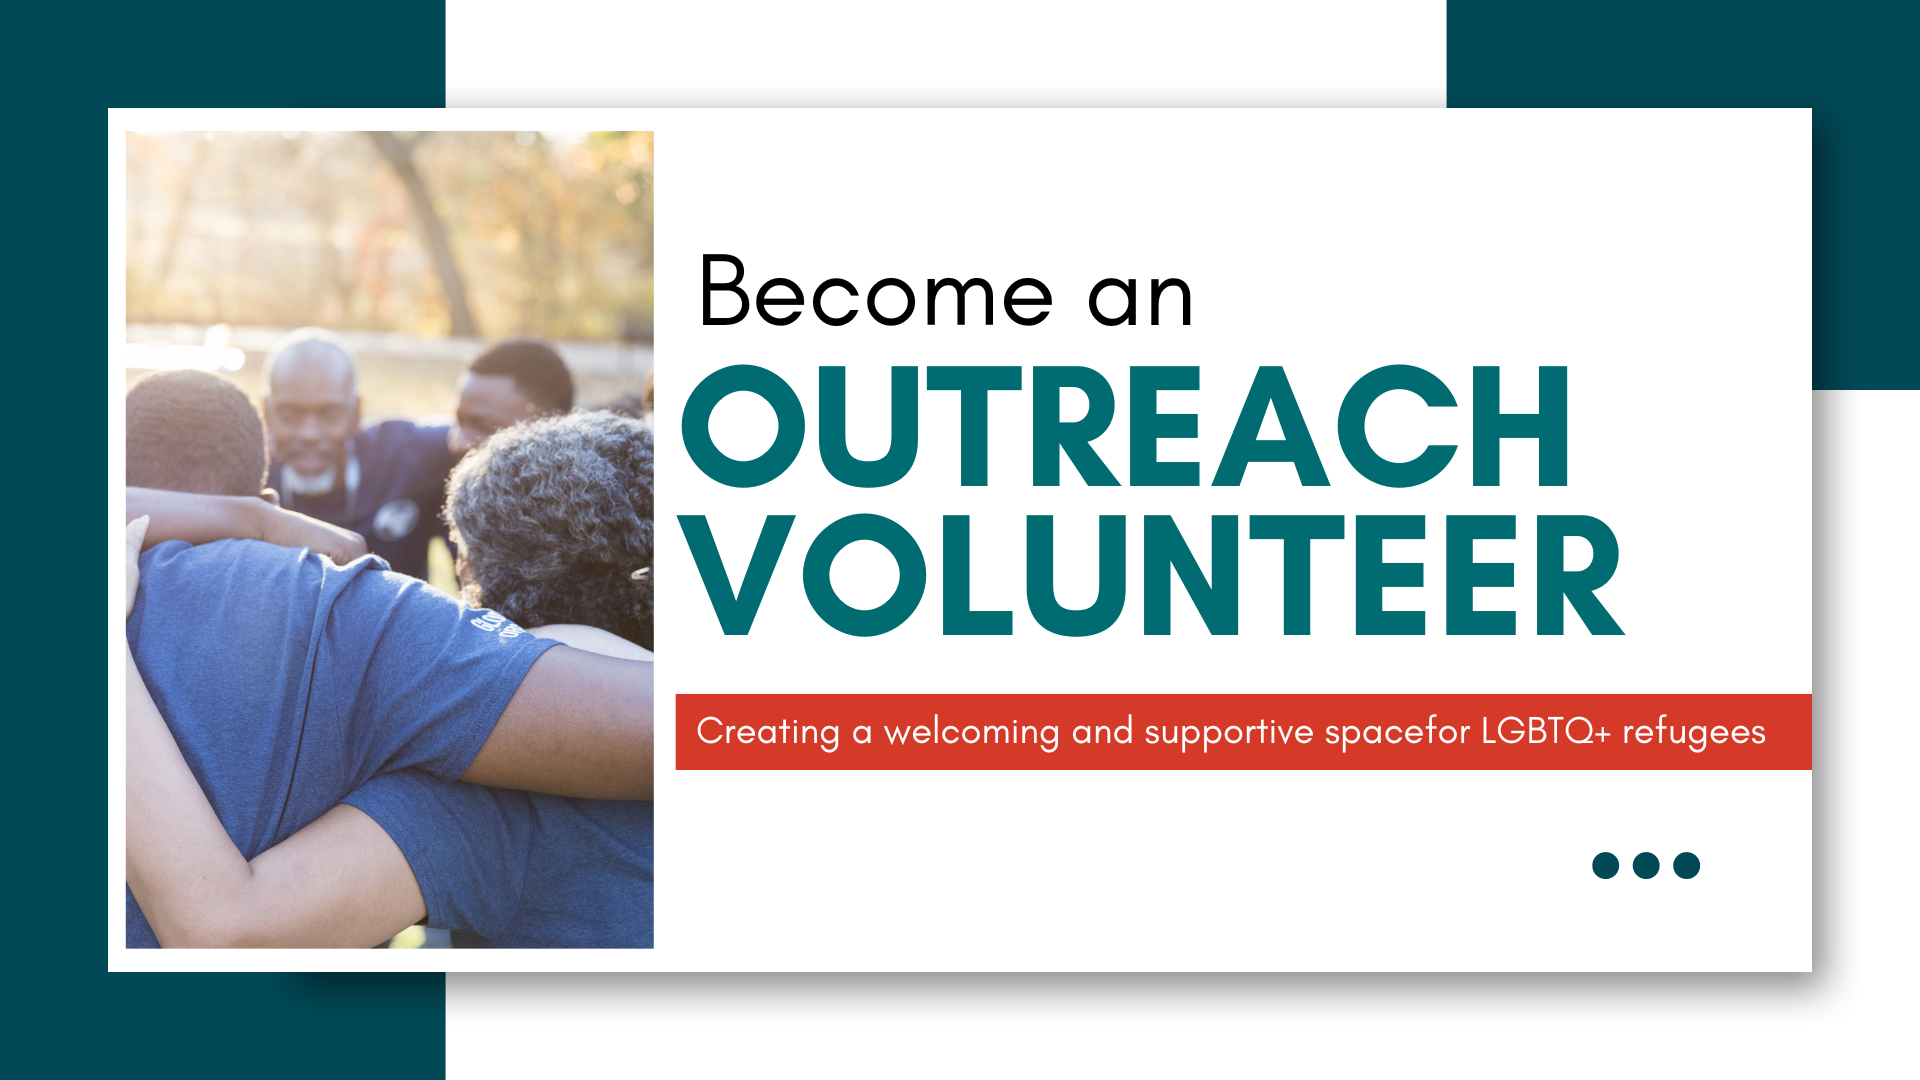 Become and Outreach volunteer